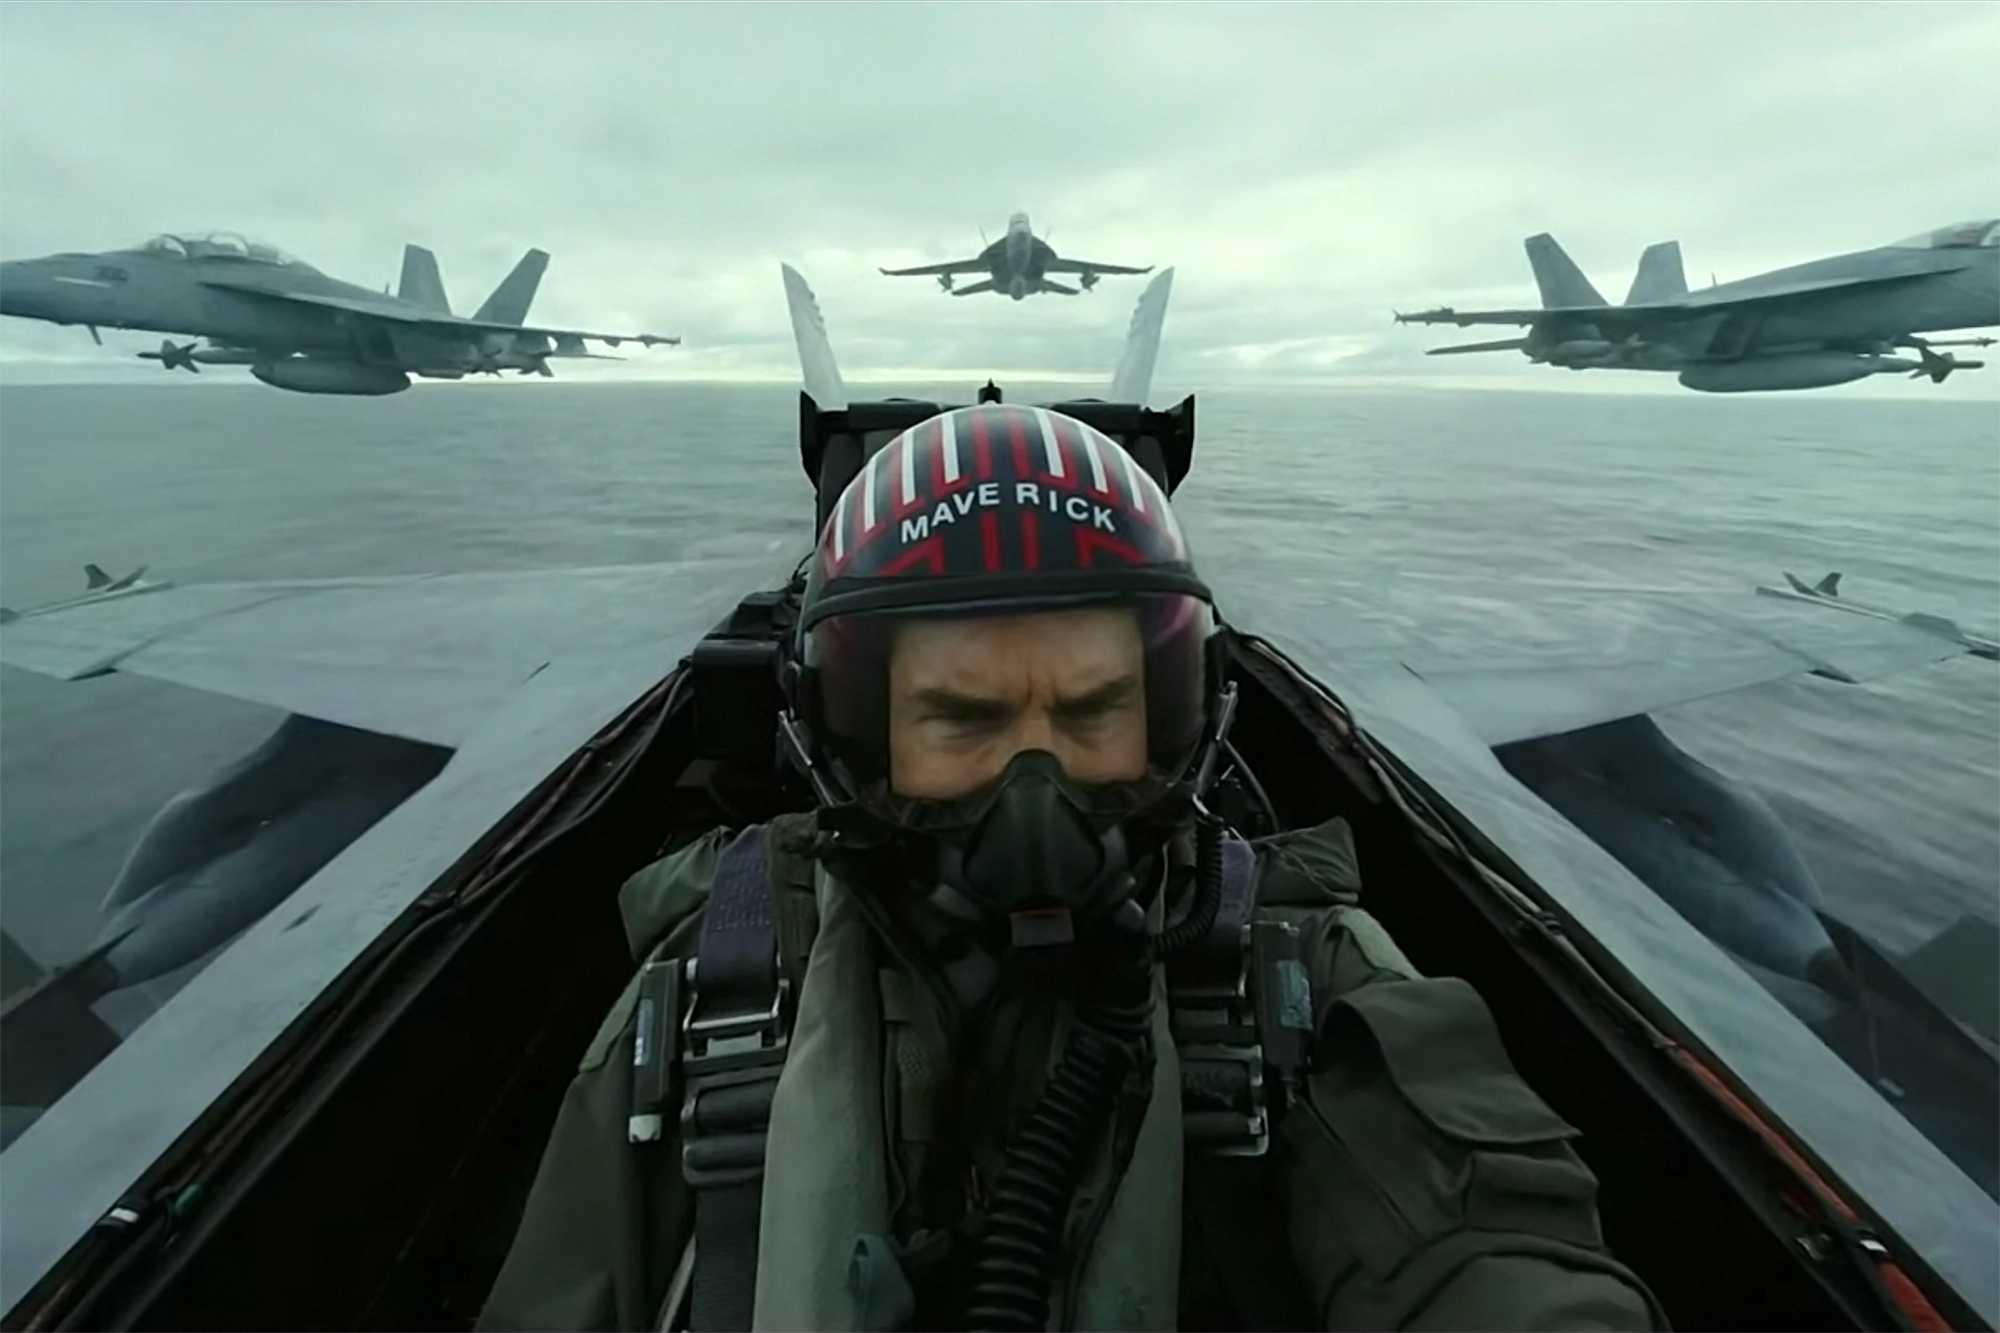 'You saved Hollywood's ass': Steven Spielberg credits Tom Cruise for rescuing movie theatres with Top Gun: Maverick